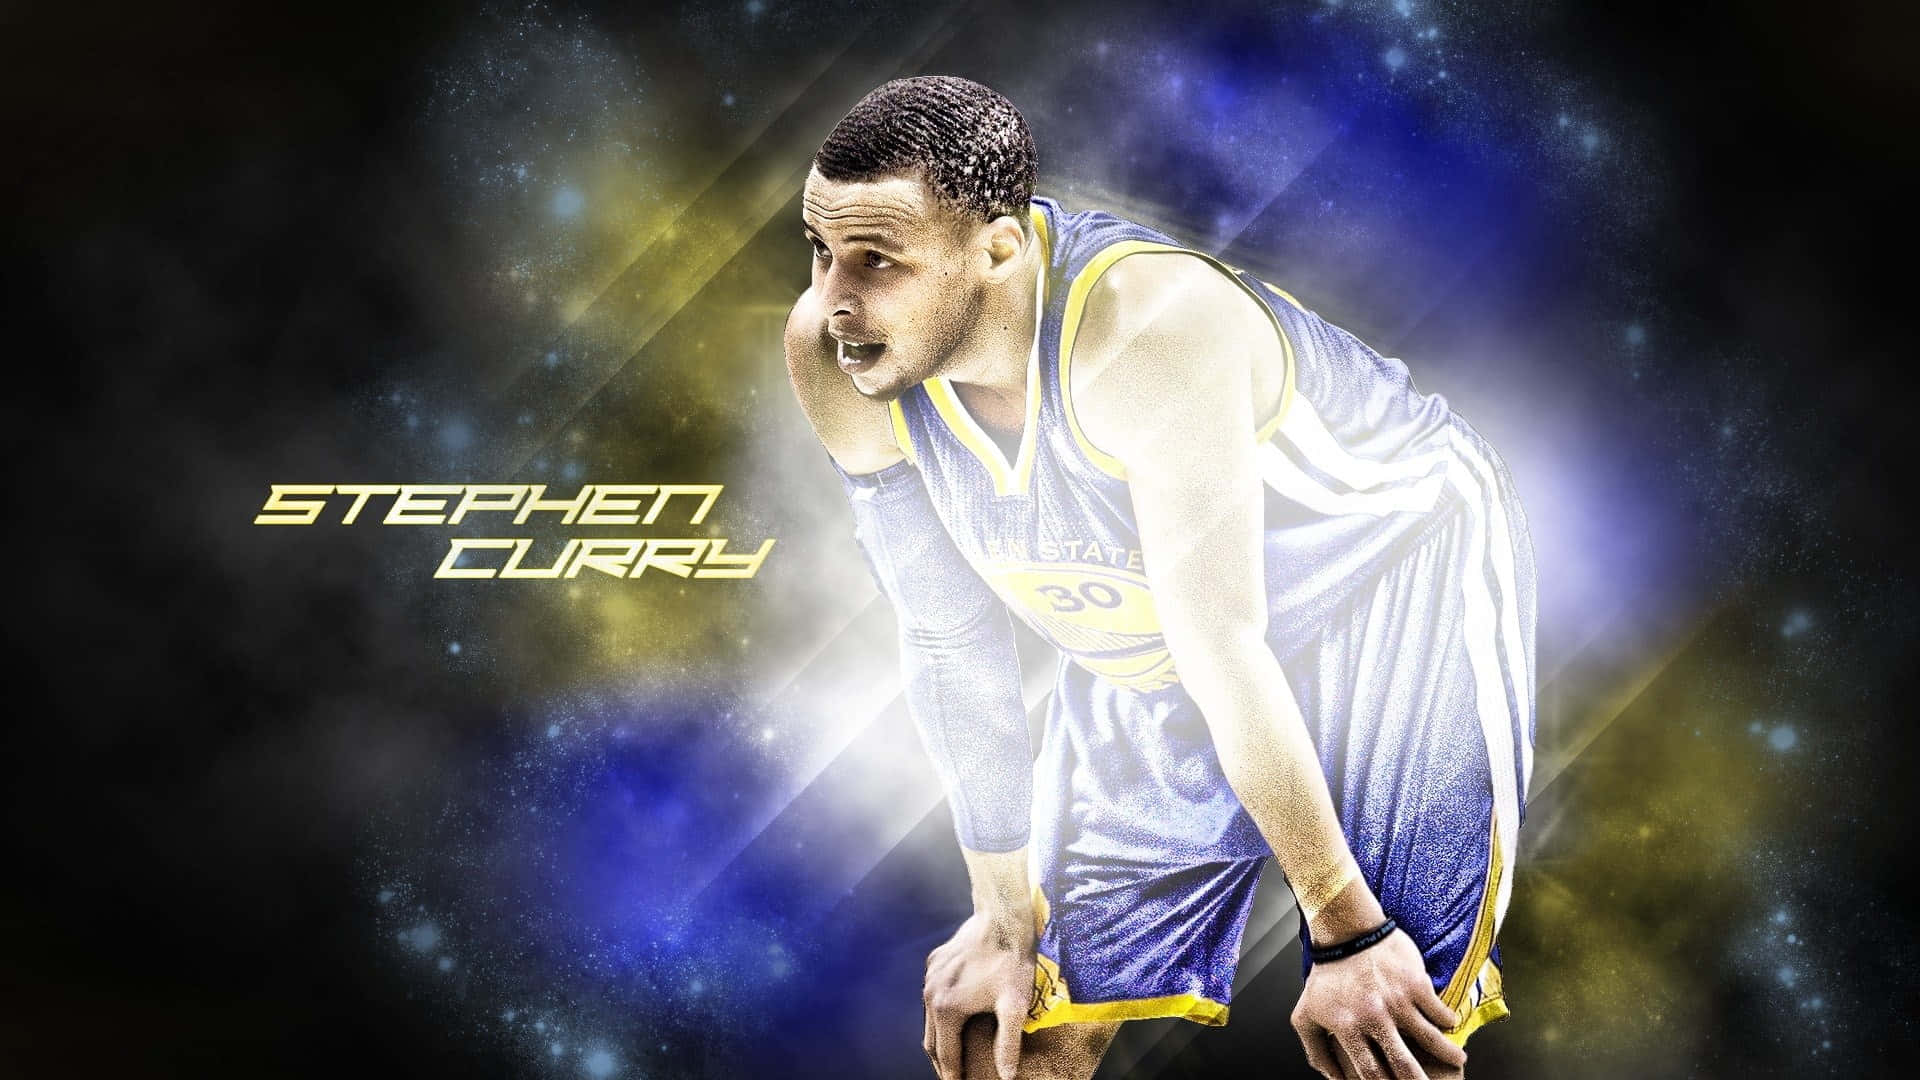 Stephen Curry, one of the greatest basketball players to ever play the game